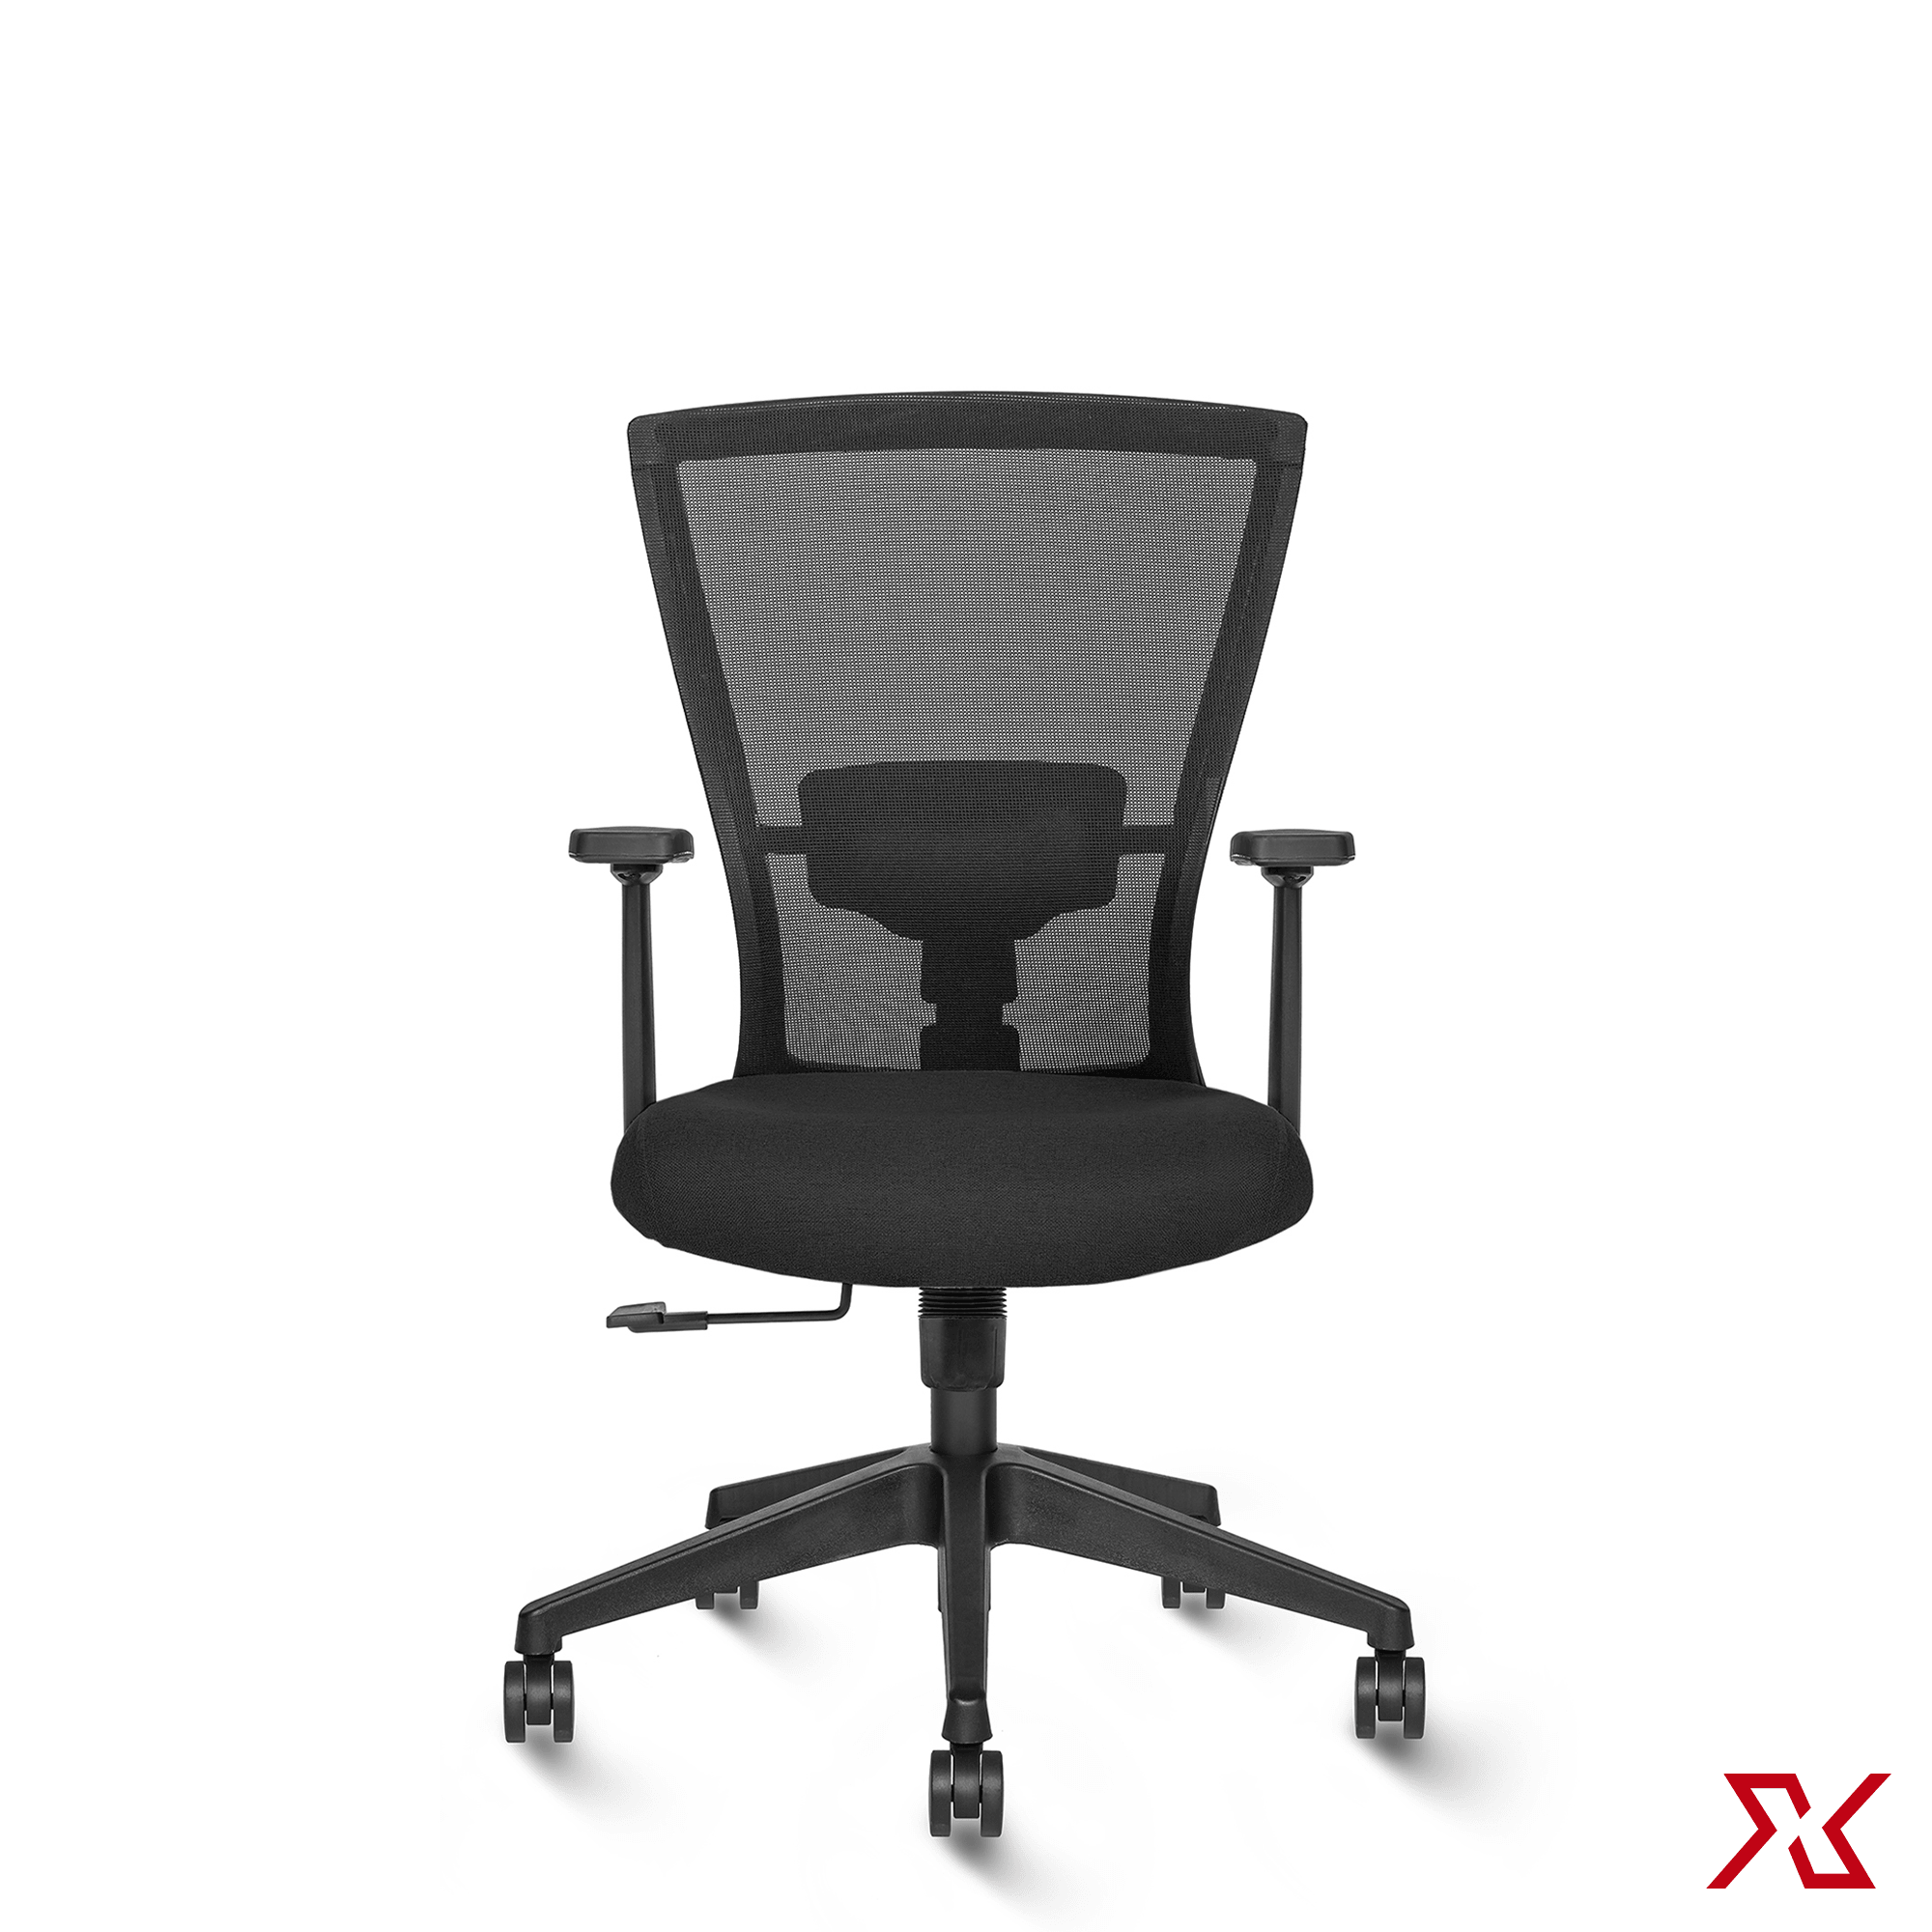 ZINC Medium Back Fly (Black Chair) - Exclusiff Seating Sytems